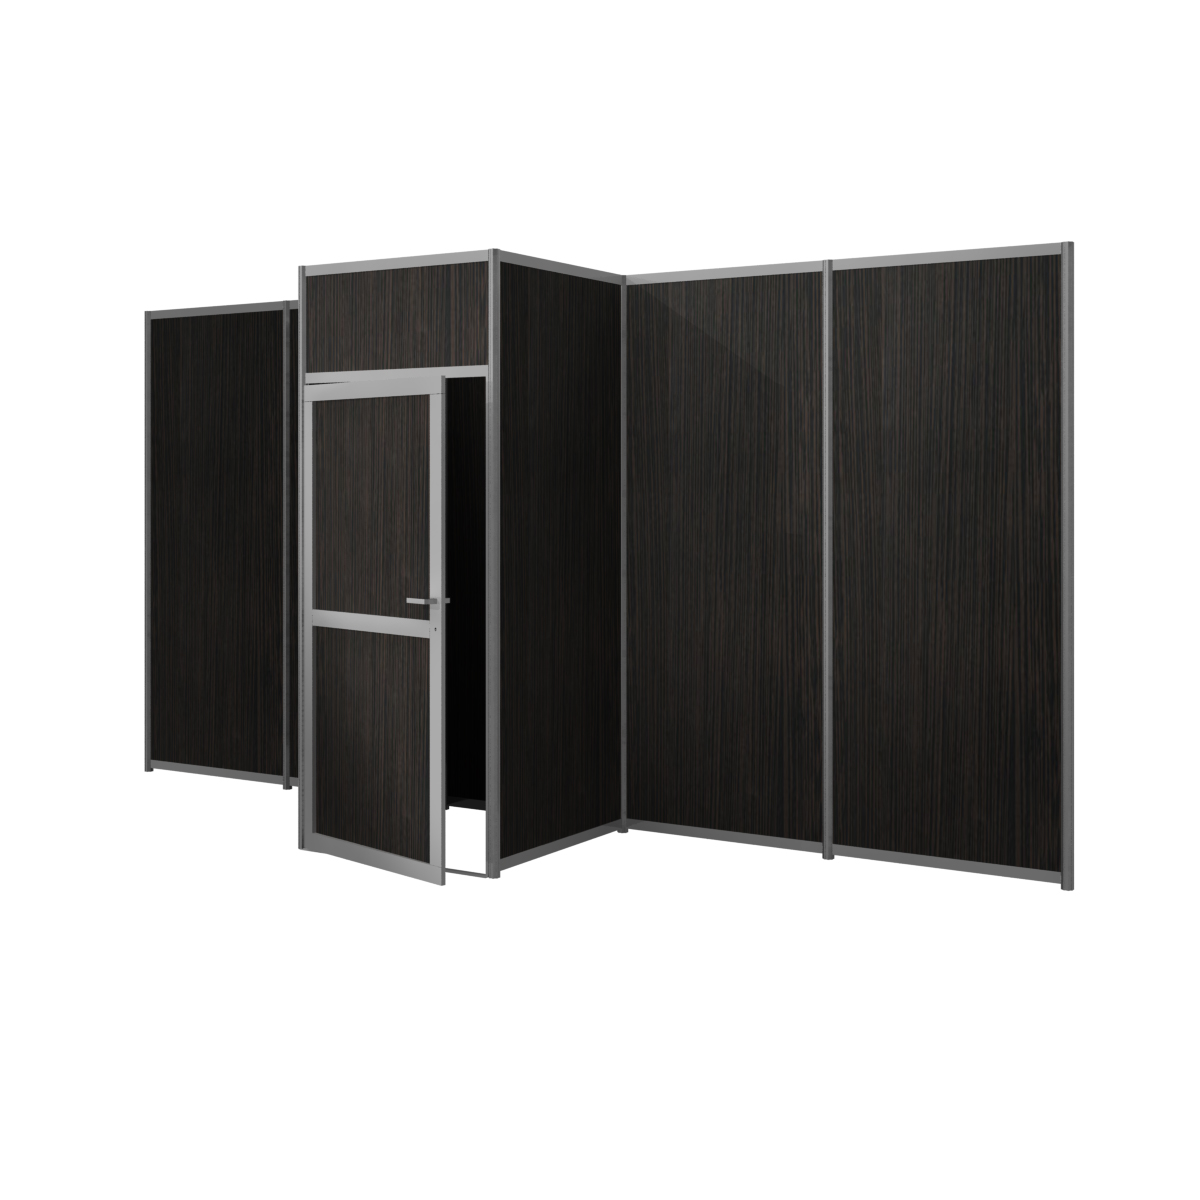 Aluminum frame storage cabinet on the back partition with melamine infill - Wenge